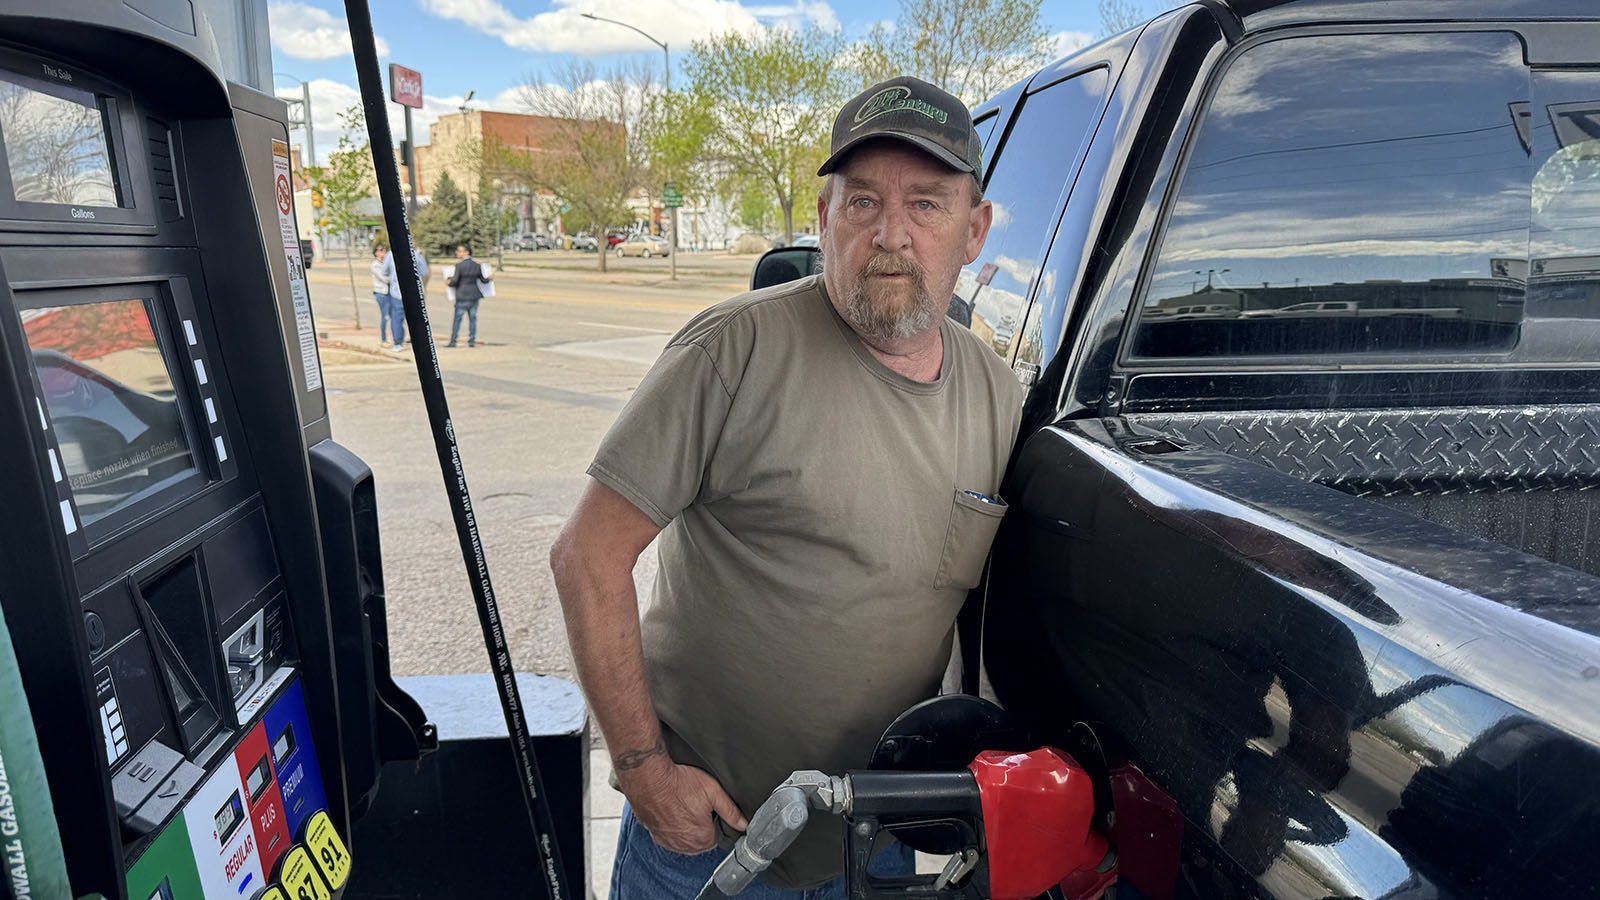 “It’s terrible. I’m living on Social Security and get a little pension from the Teamsters,” complained motorist Shane Shockley who once worked for trucking giant Consolidated Freightways. “I came in here to get a newspaper, and I saw this deal (at Hi Market). I’m topping off my tank,” he said.